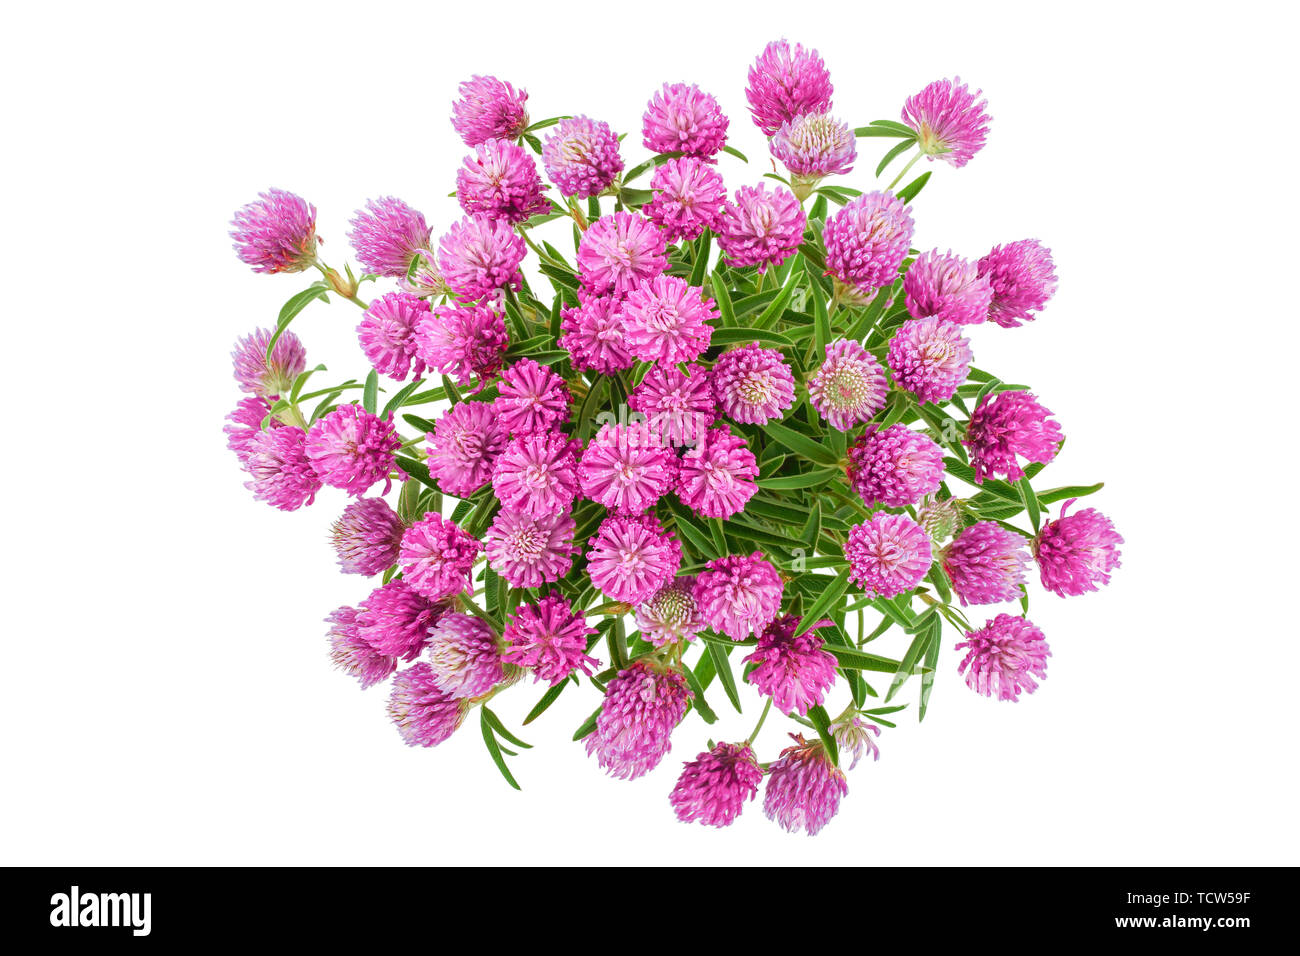 flower of a red clover clover with leaves and a stem close-up isolated on a white background. Top view. Stock Photo